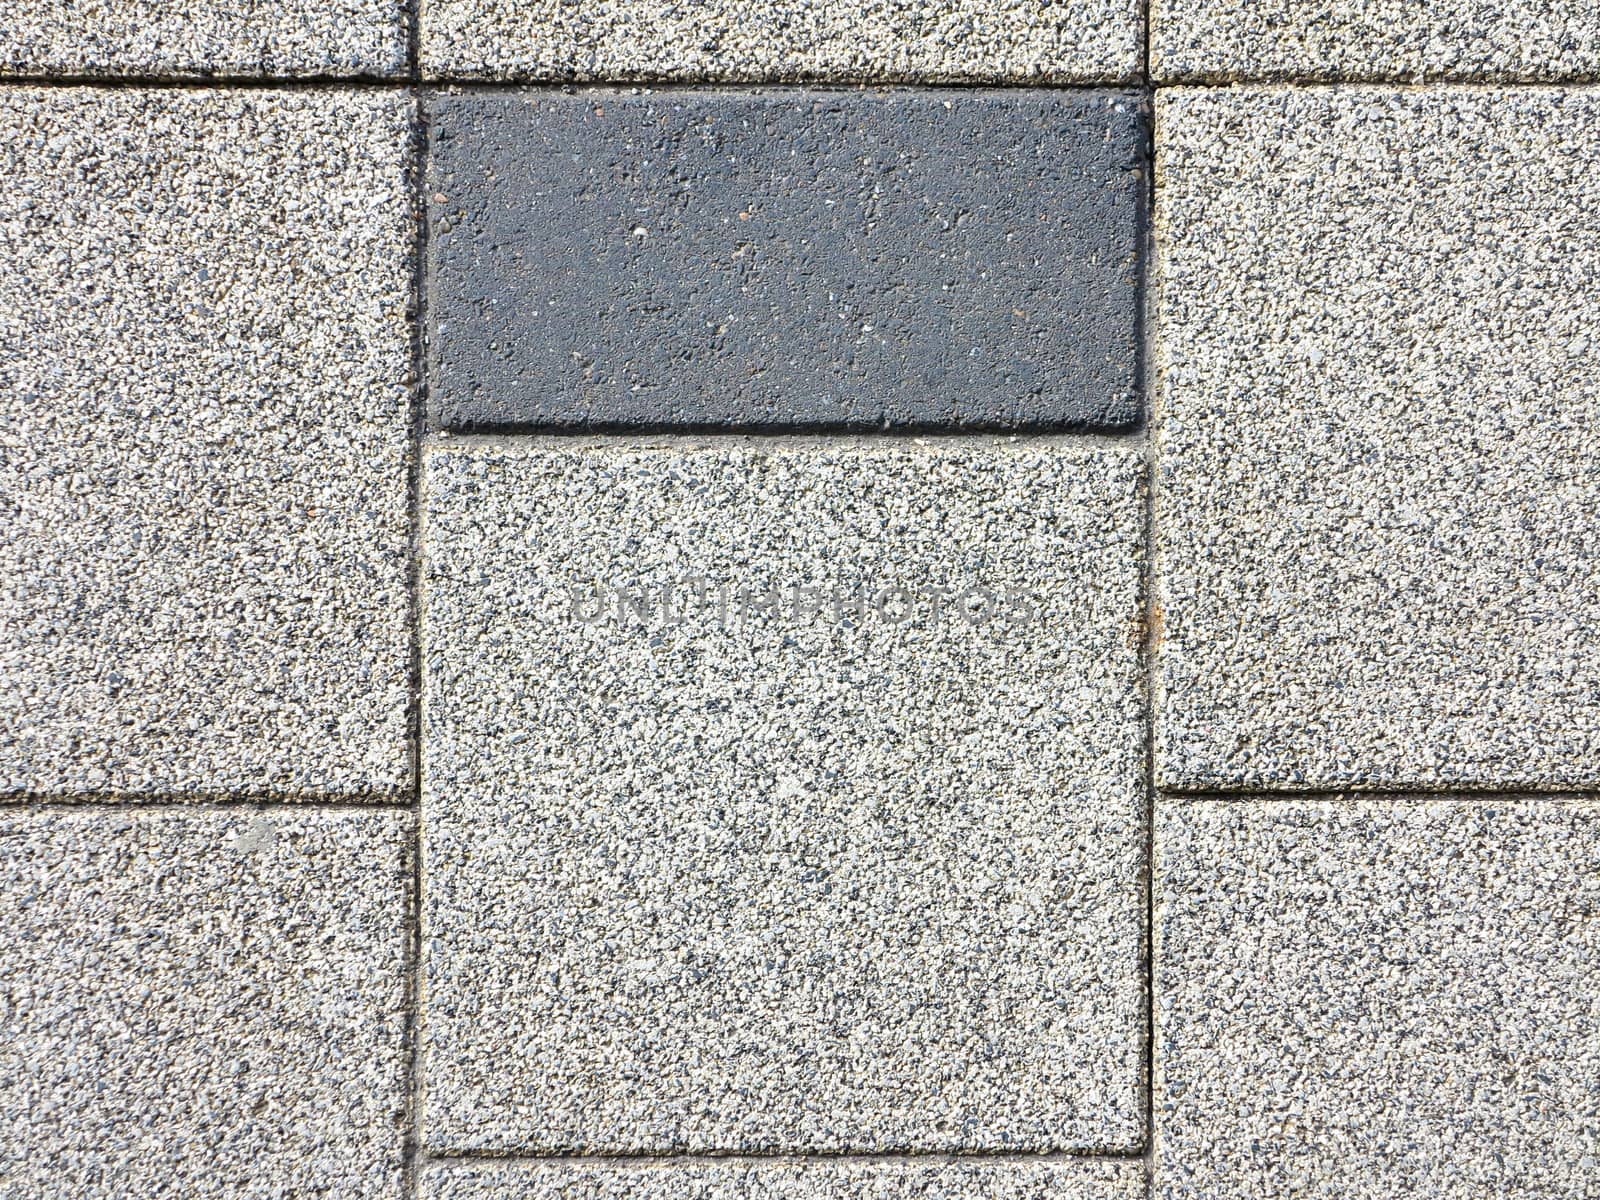 Seemingly pattern of grey color concrete road pavement brick of the pedestrian pathway